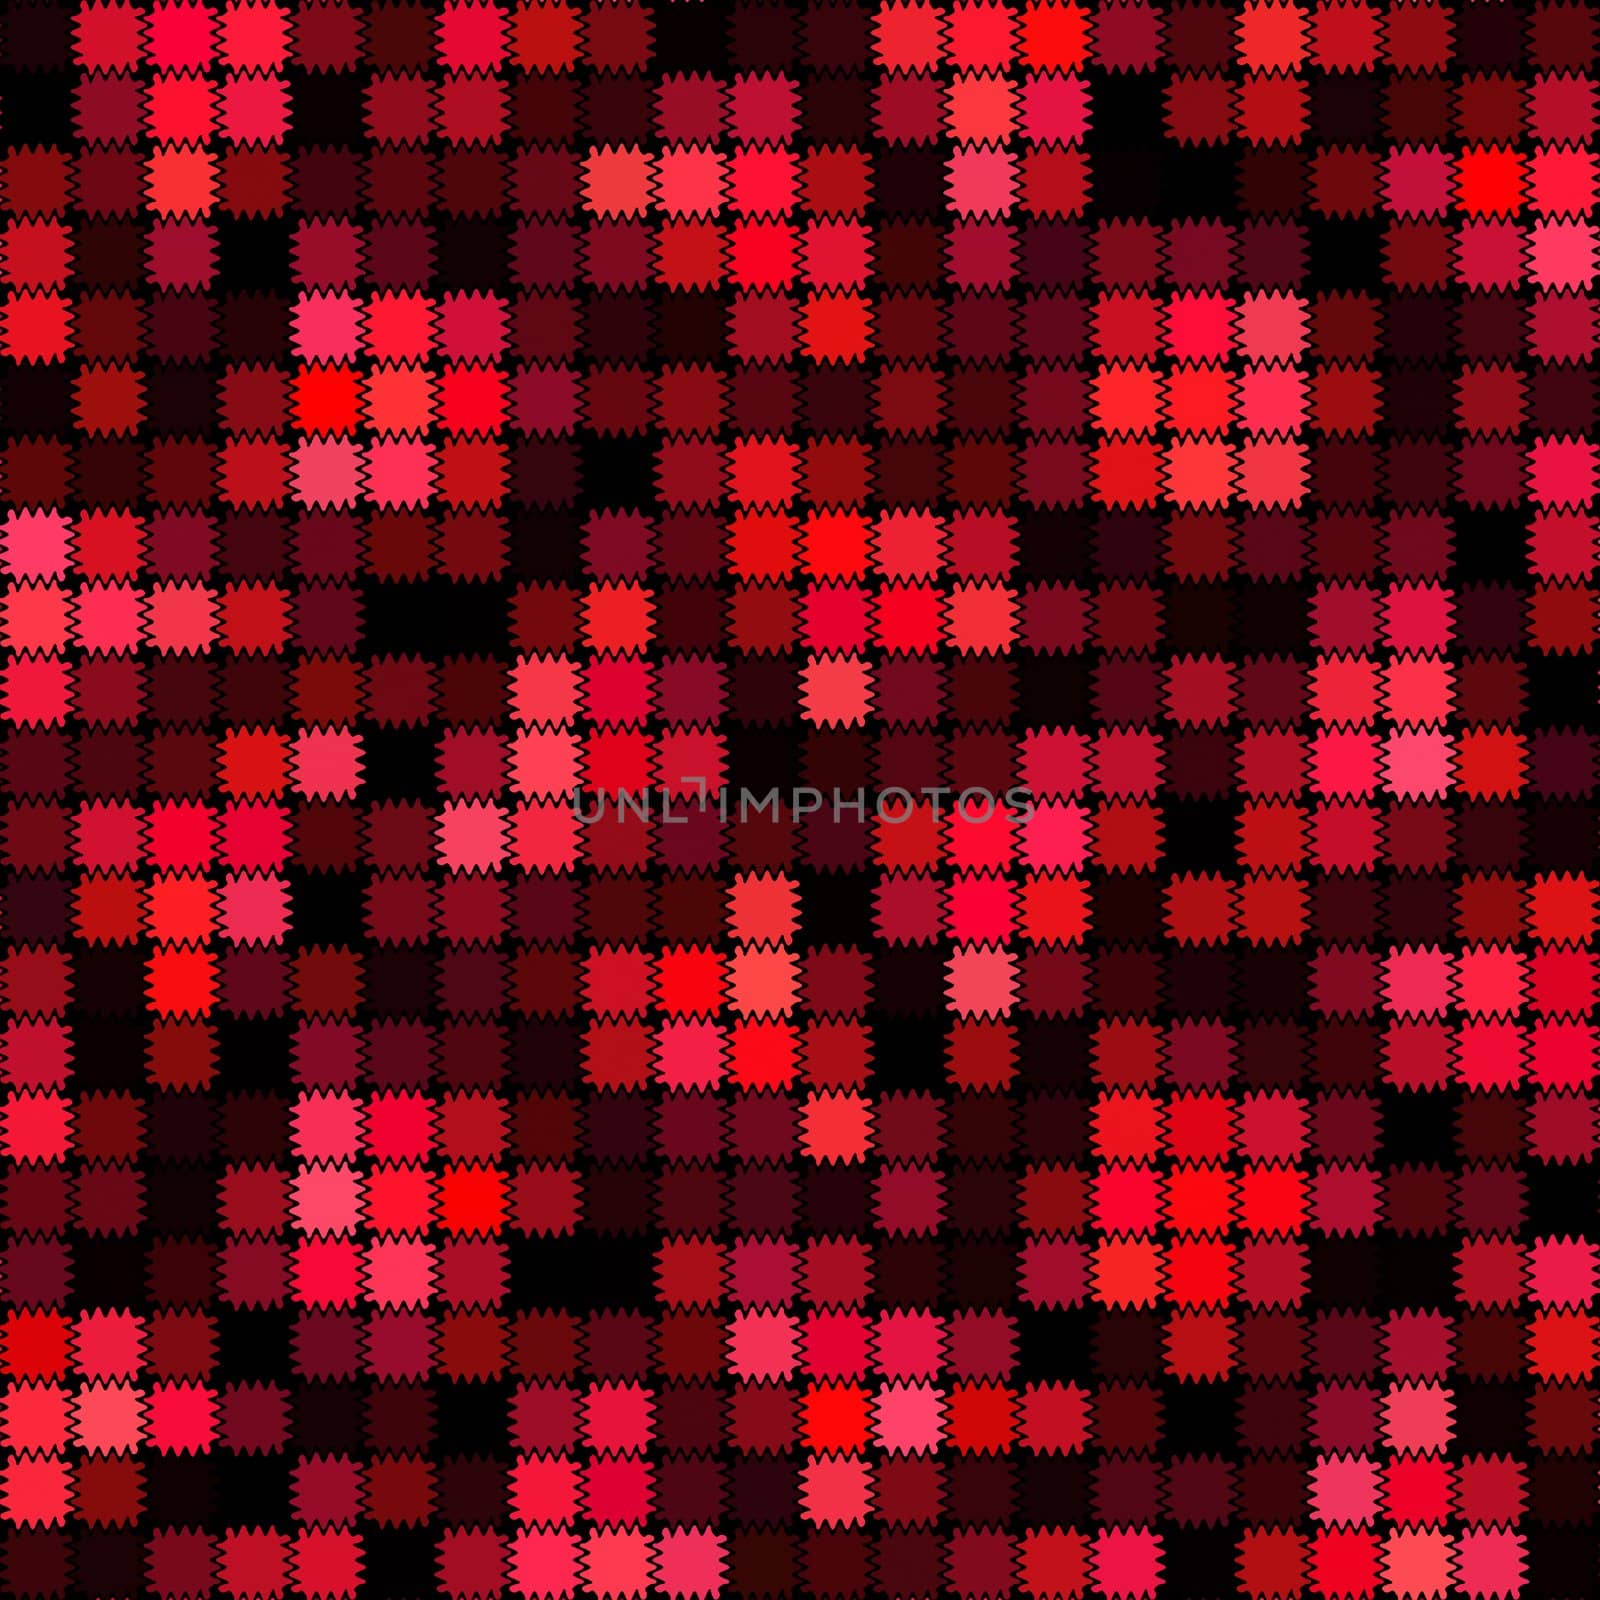 seamless texture of vibrant little cubes in different shades of red